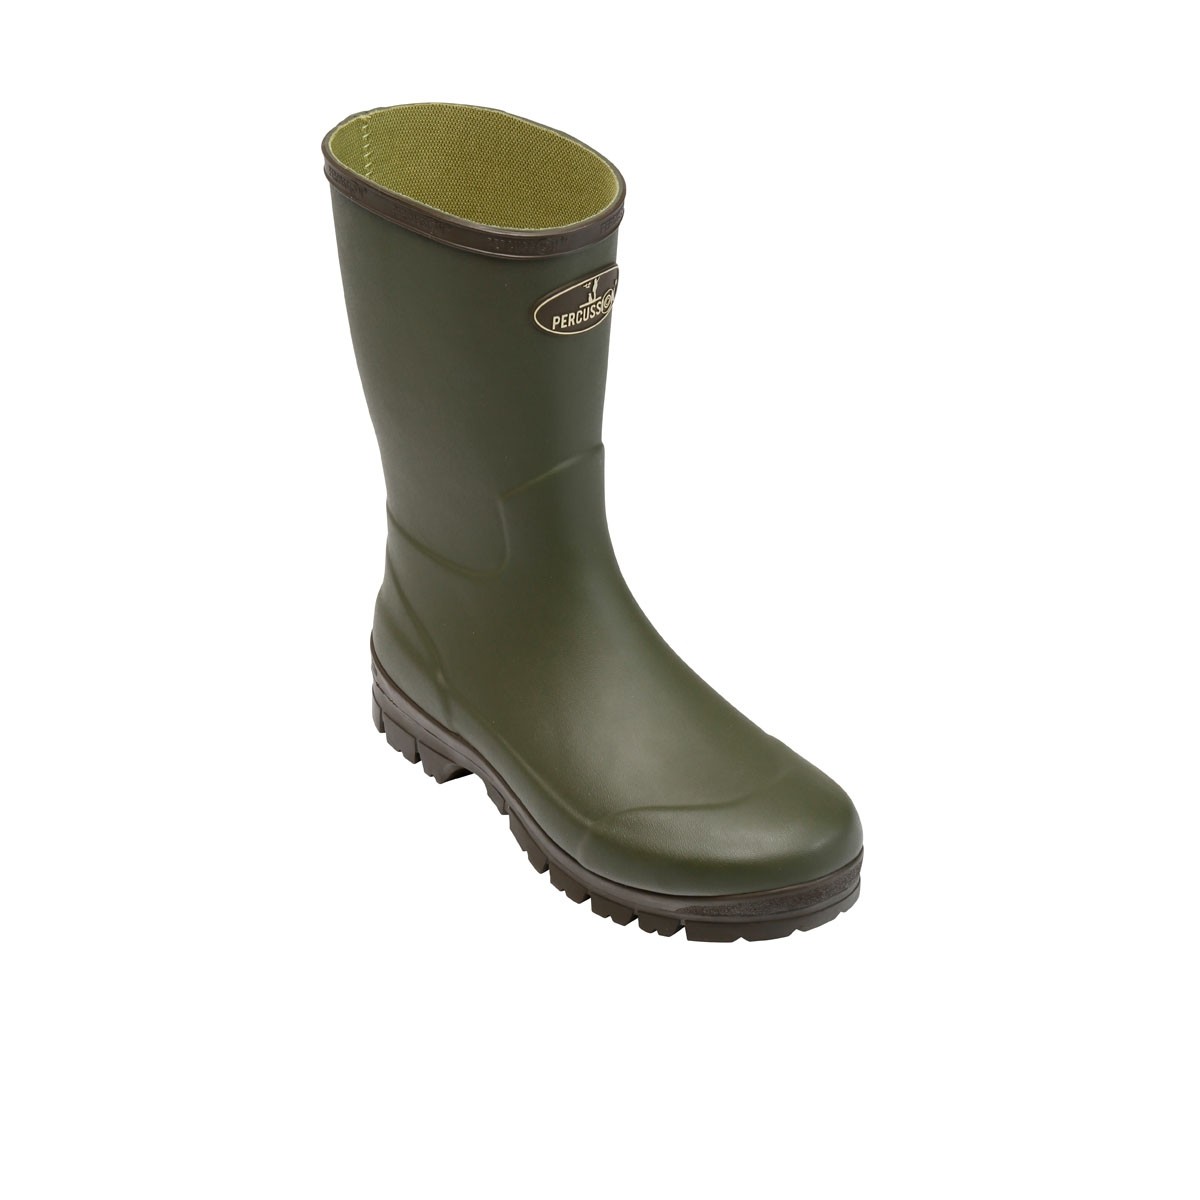 DEMI BOTTES MARLY MEN'S RUBBER BOOTS